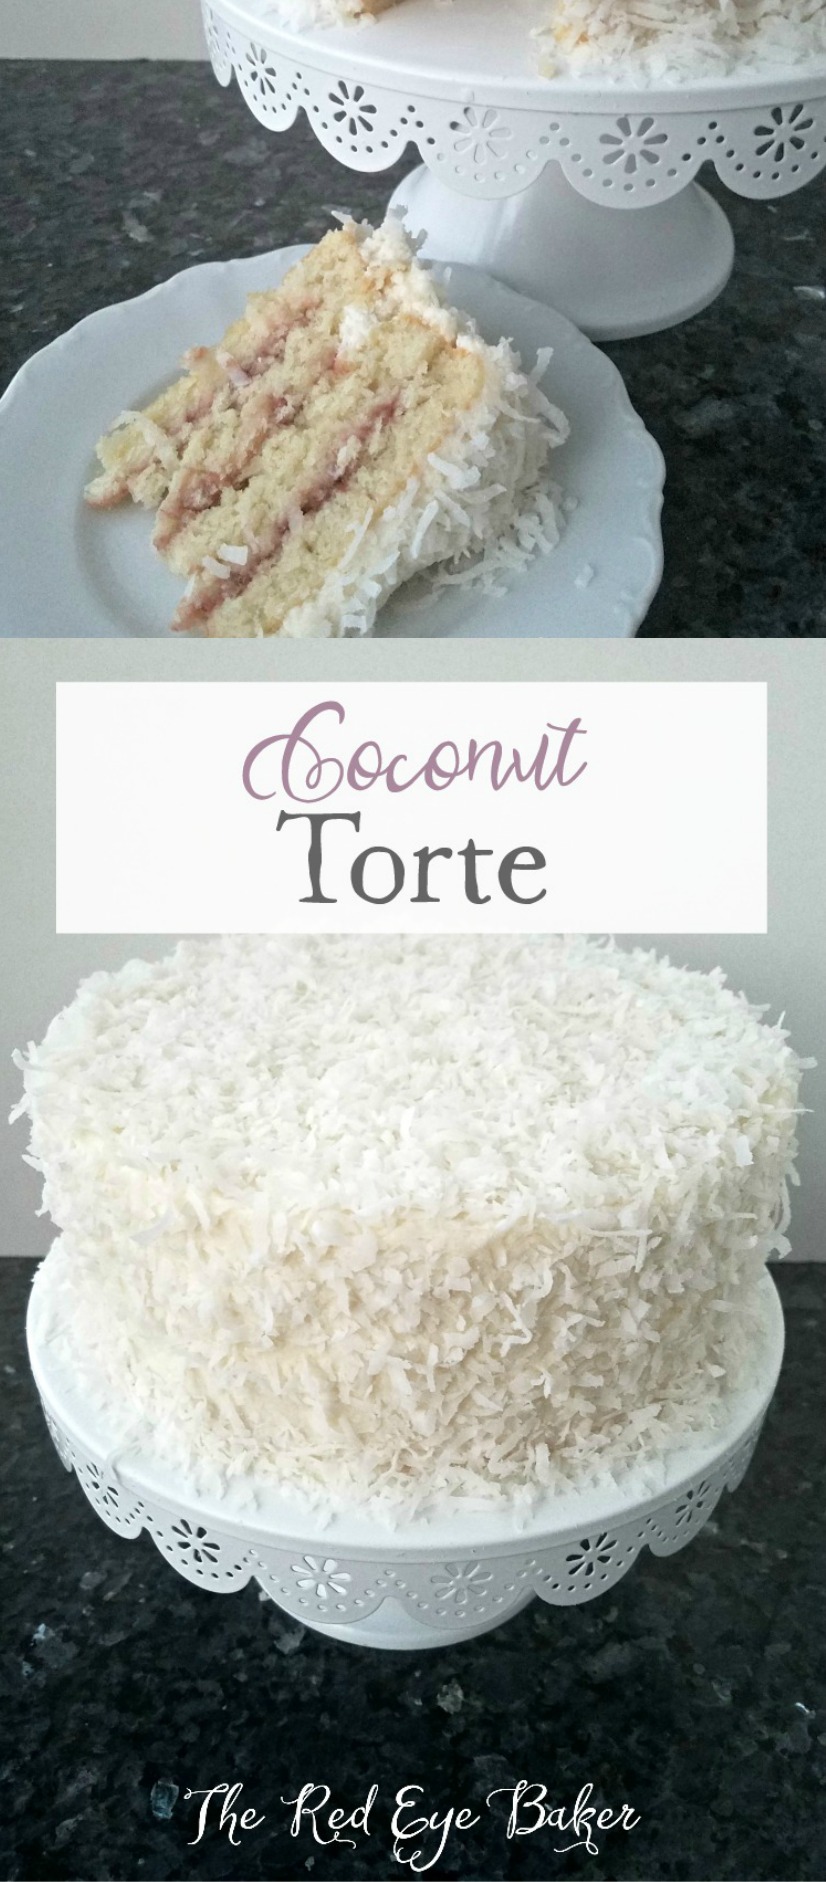 Coconut Torte | Bring a little taste of sunshine to your kitchen with this Coconut Torte! The coconut and simple raspberry filling will have you looking forward to sunny summer days in no time!